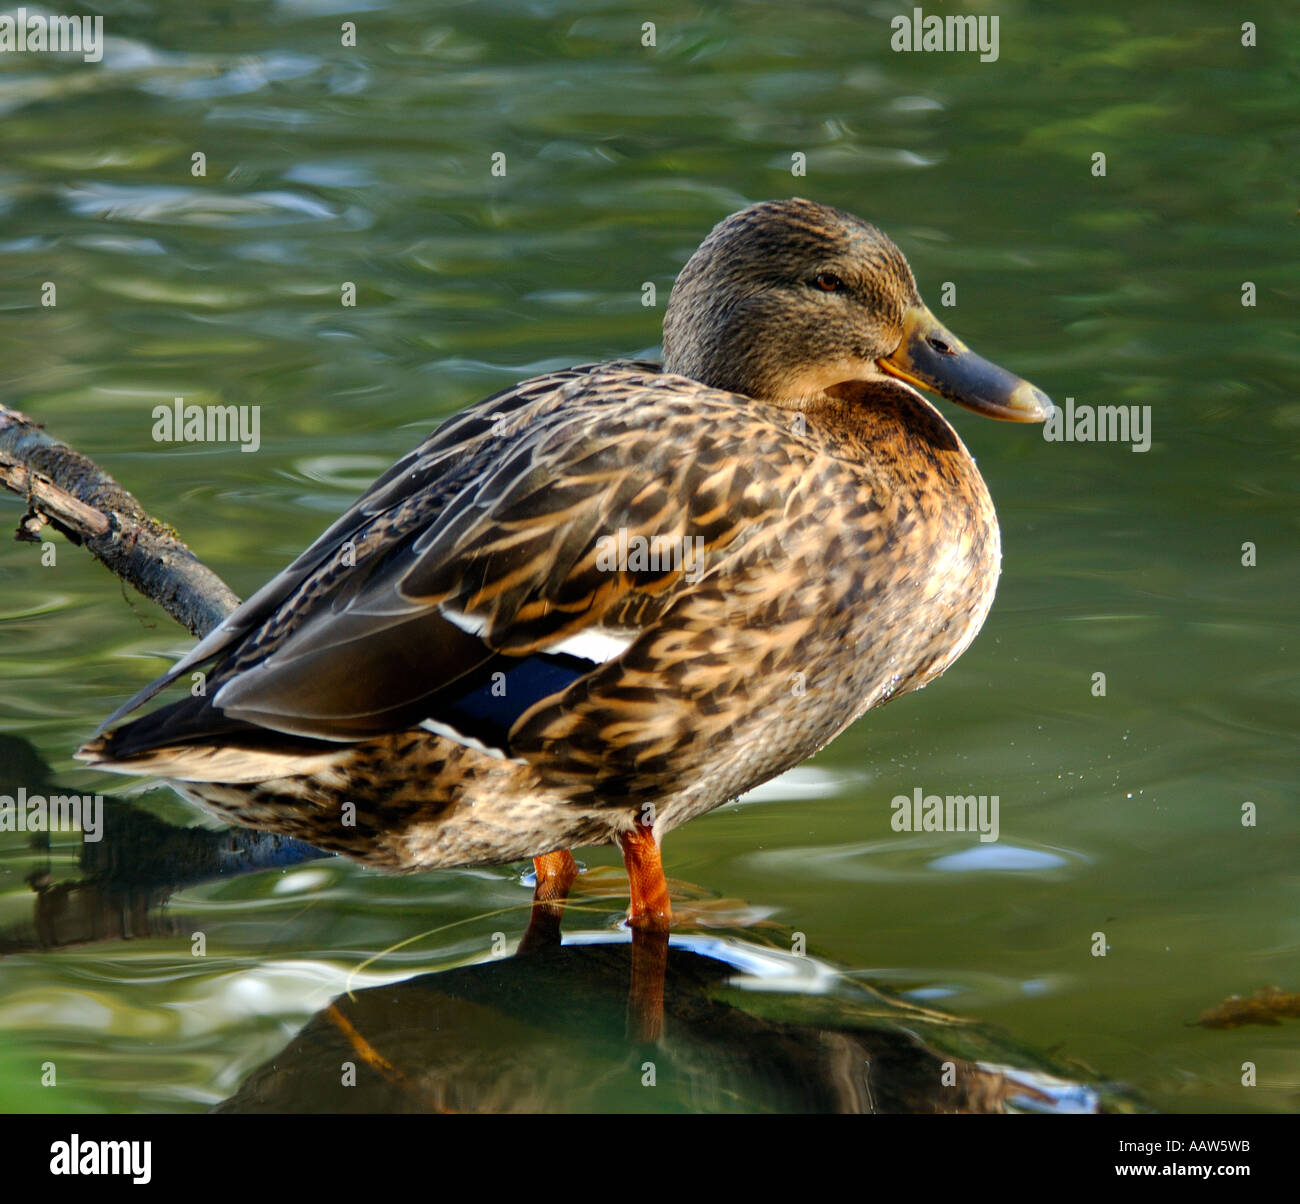 Nice clear image of a duck standing in very clear water at the edge of a lake Stock Photo